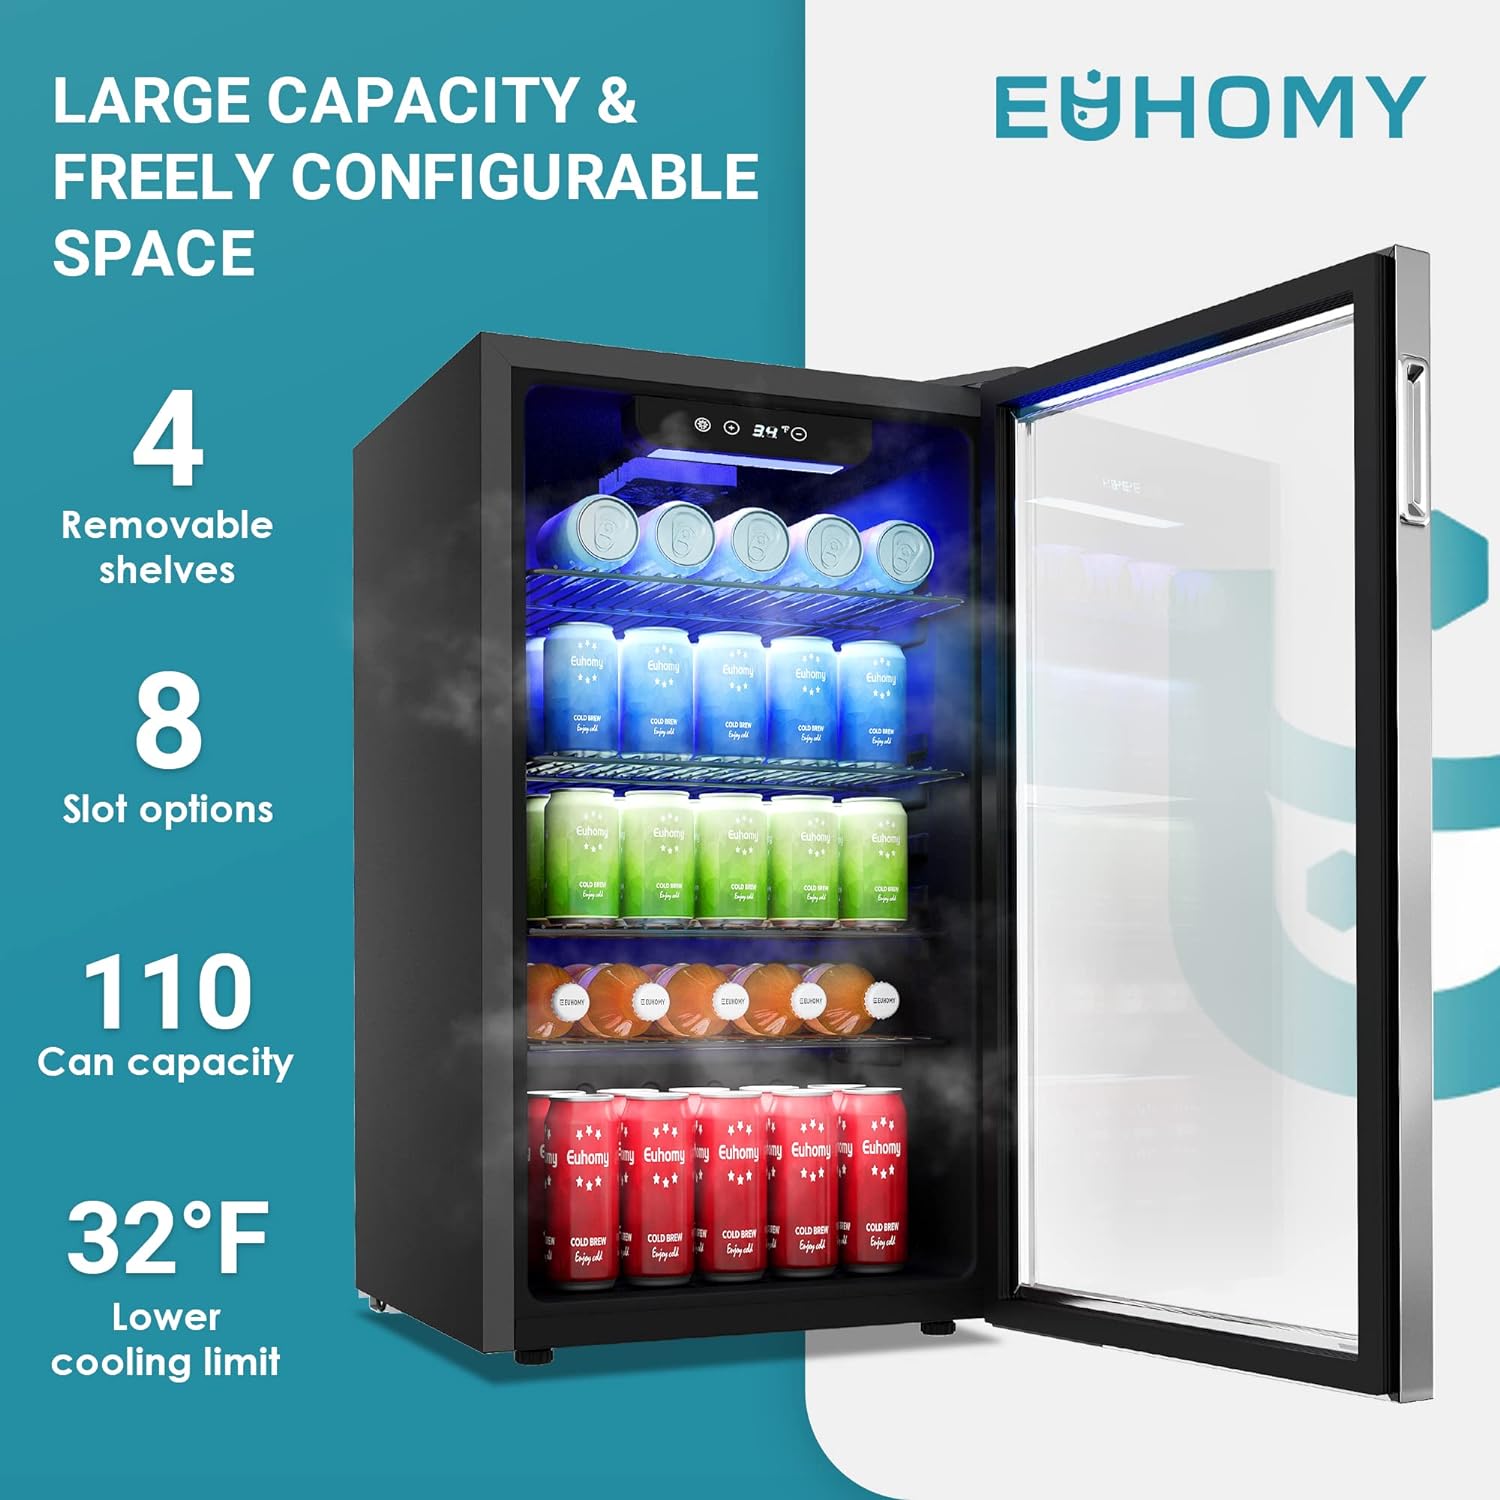 EUHOMY Beverage Refrigerator and Cooler 126 Can Mini fridge with Glass Door